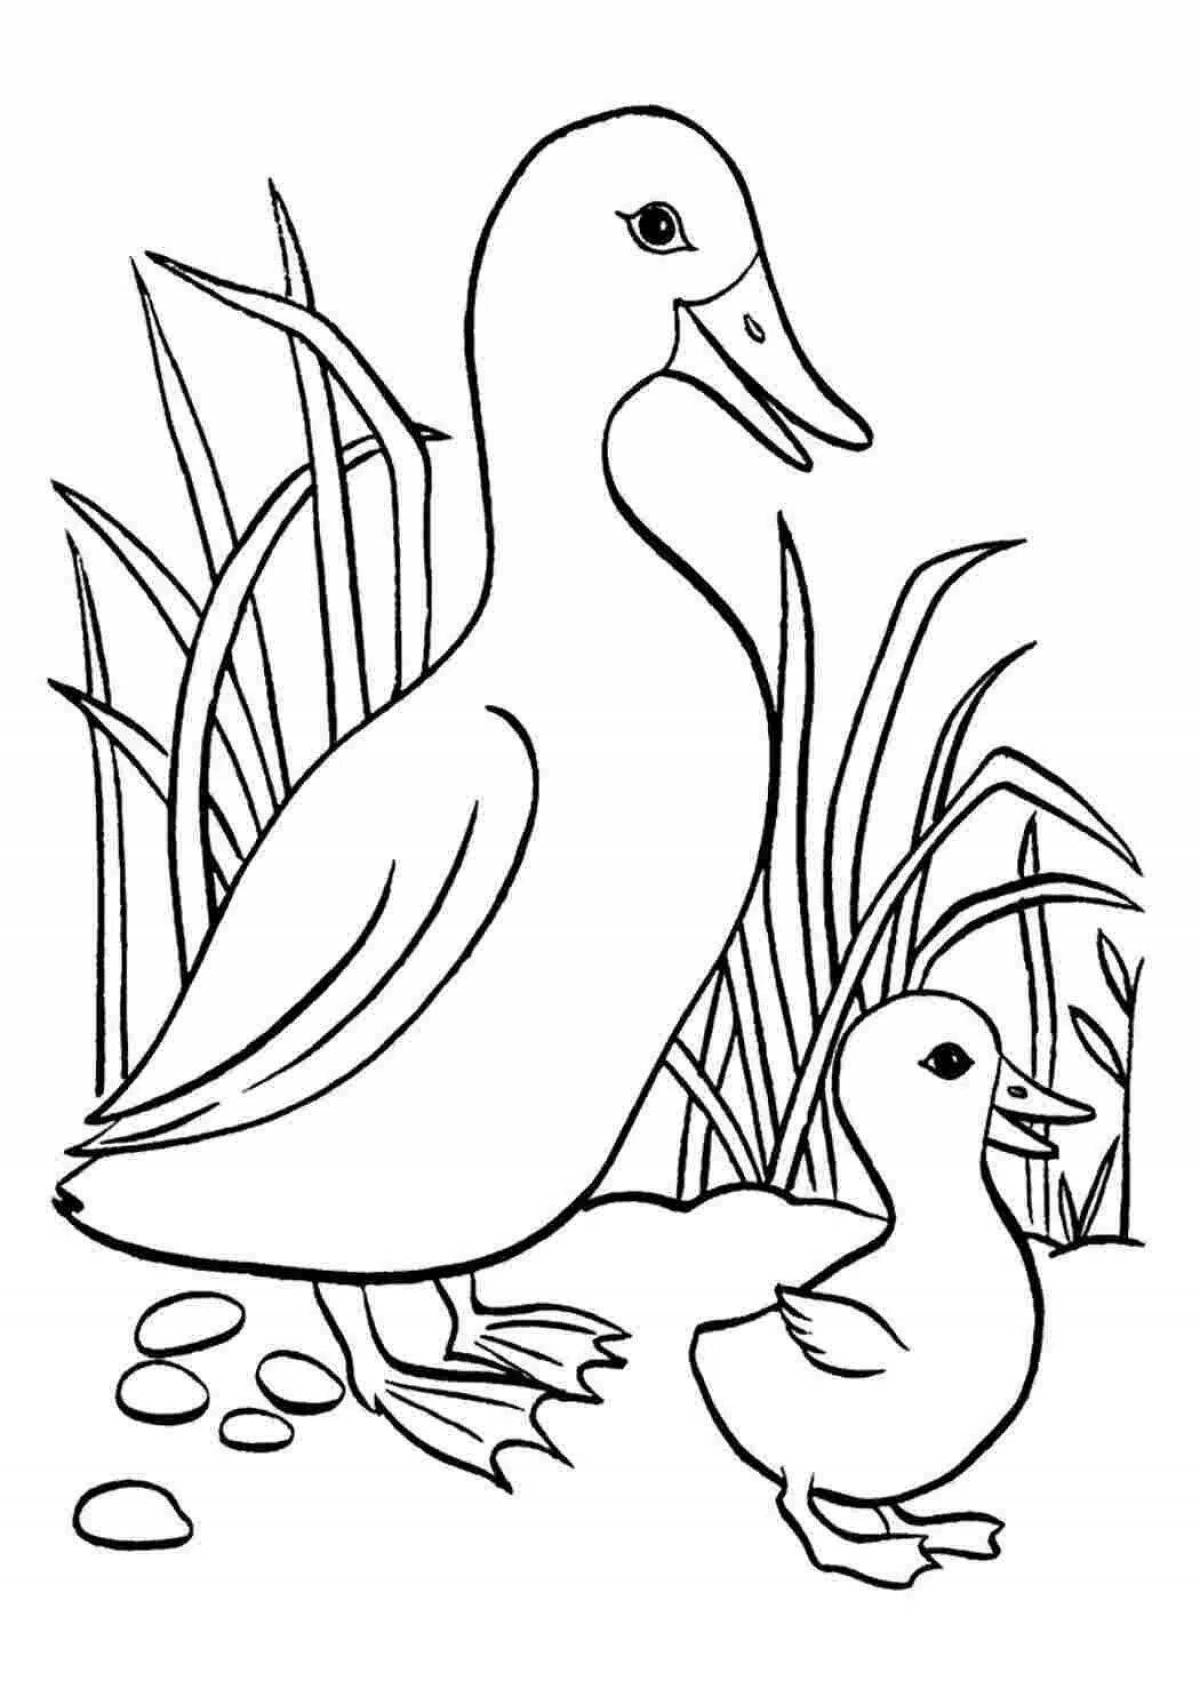 Wonderful animal and bird coloring pages